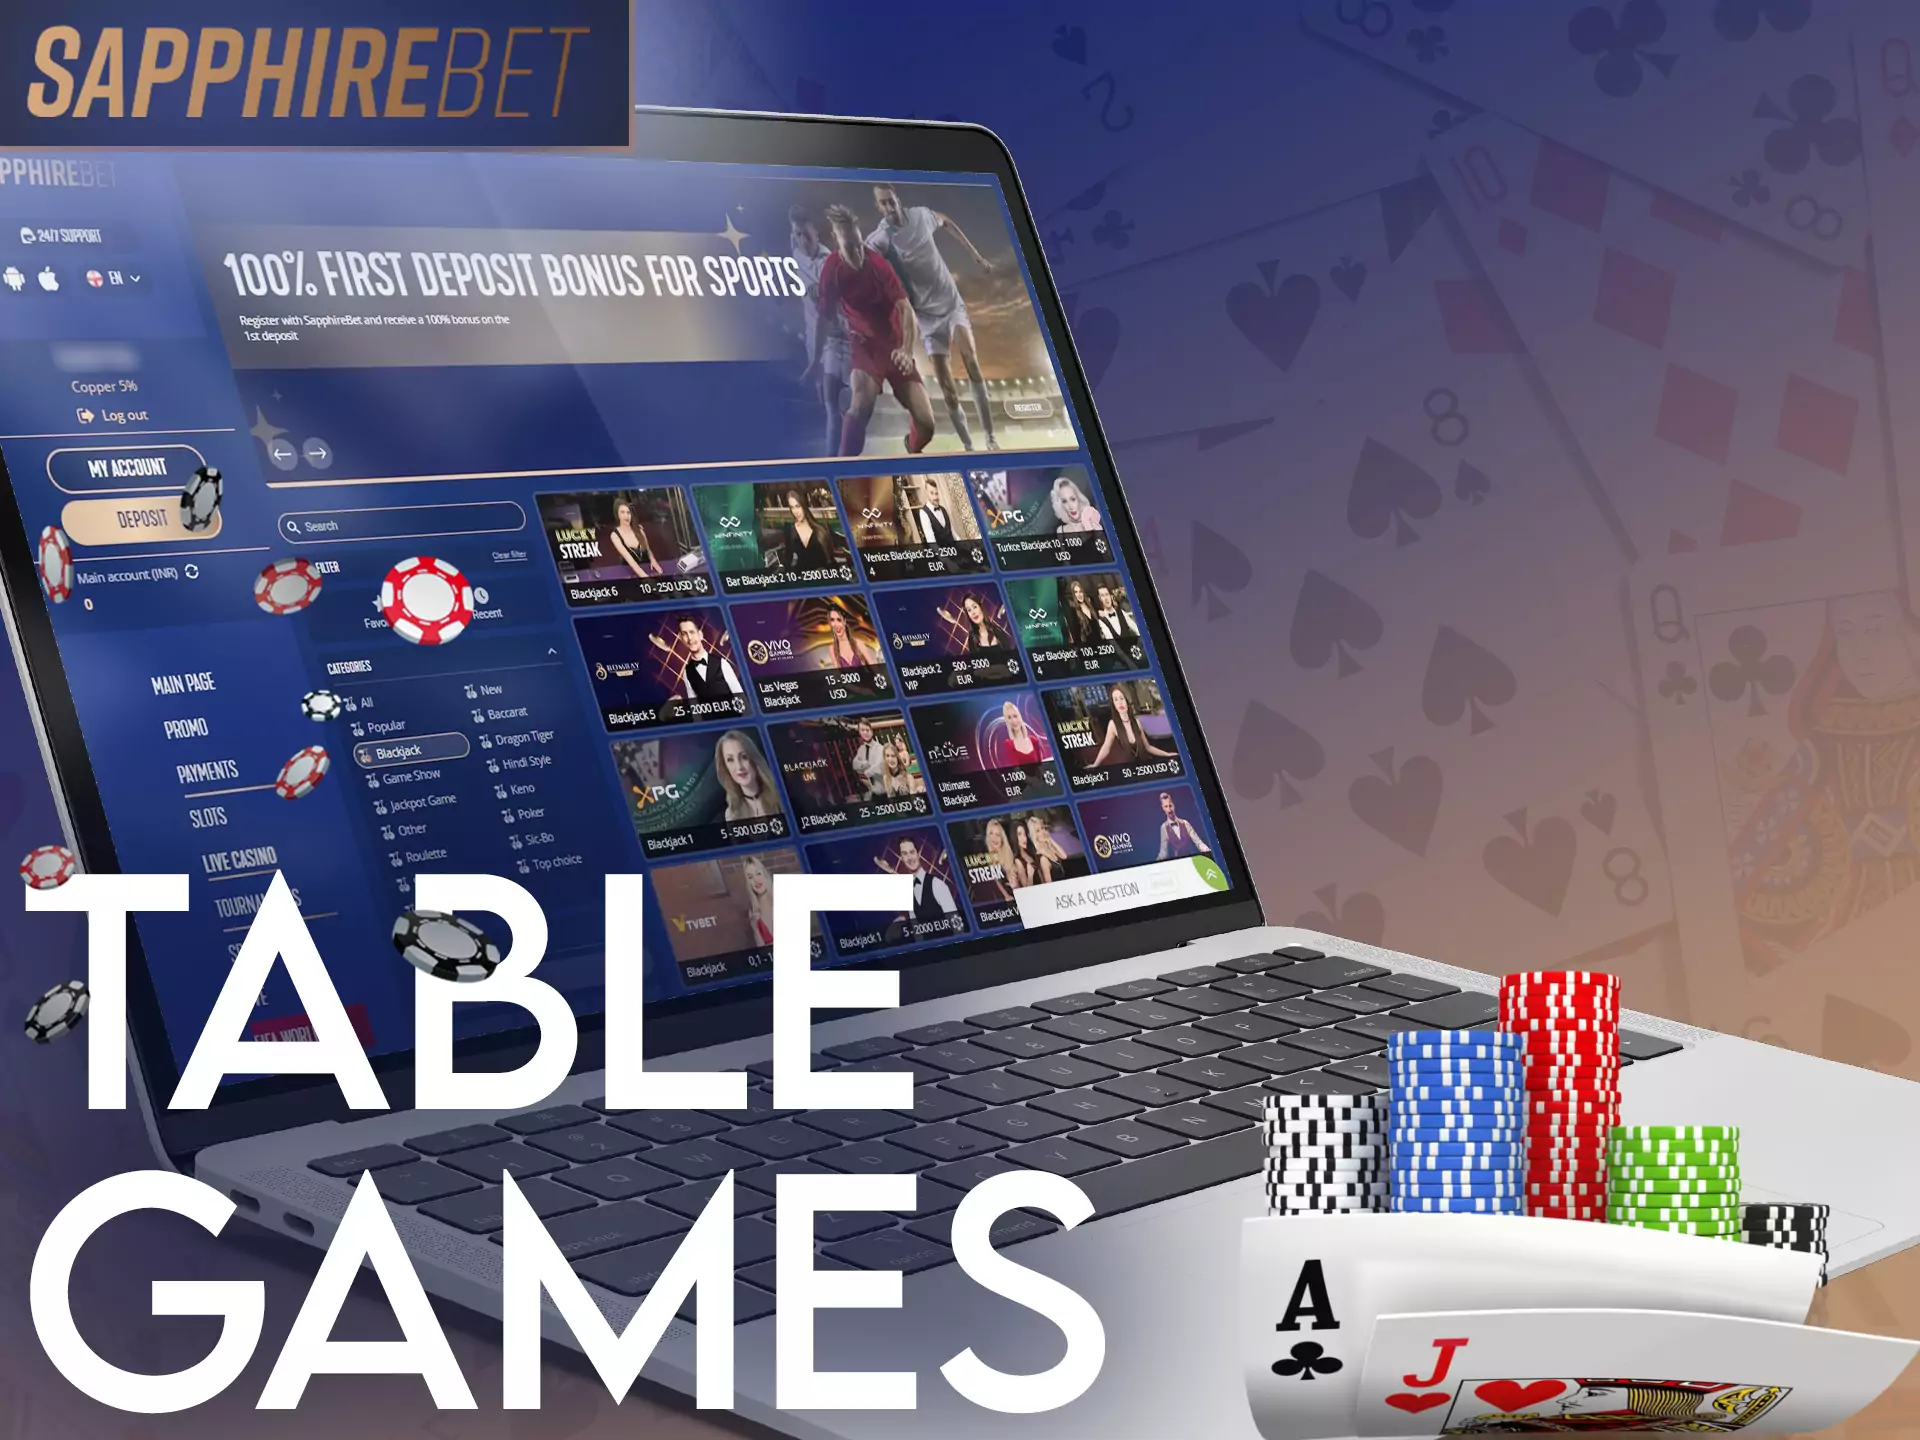 Sapphirebet Casino offers players to try different games: baccarat, roulette, blackjack and more.